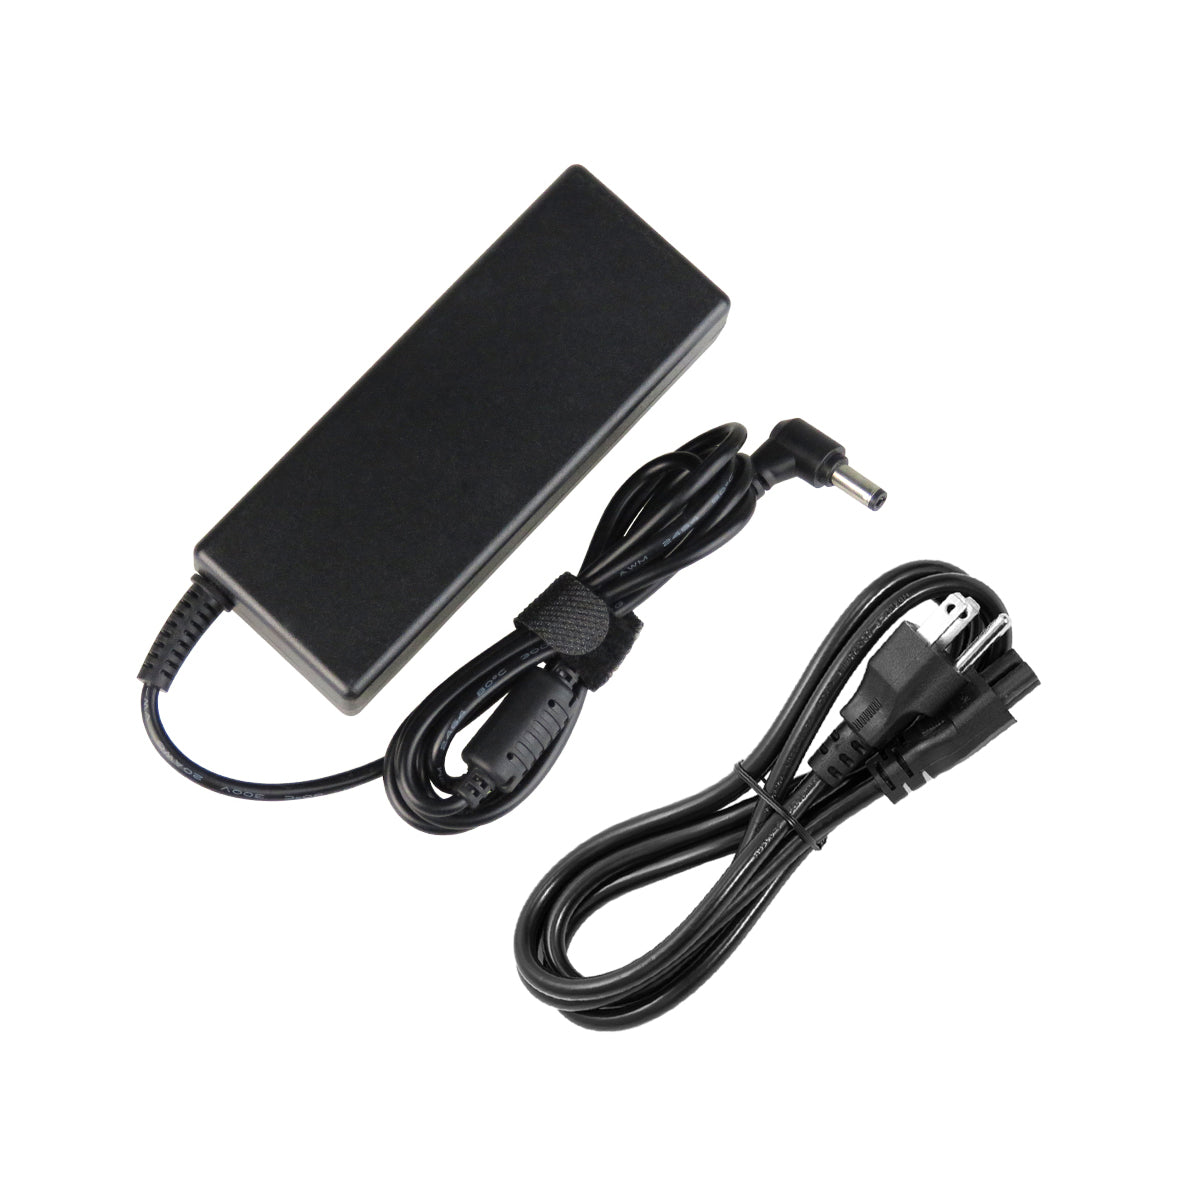 AC Adapter Charger for ASUS X83V Notebook.